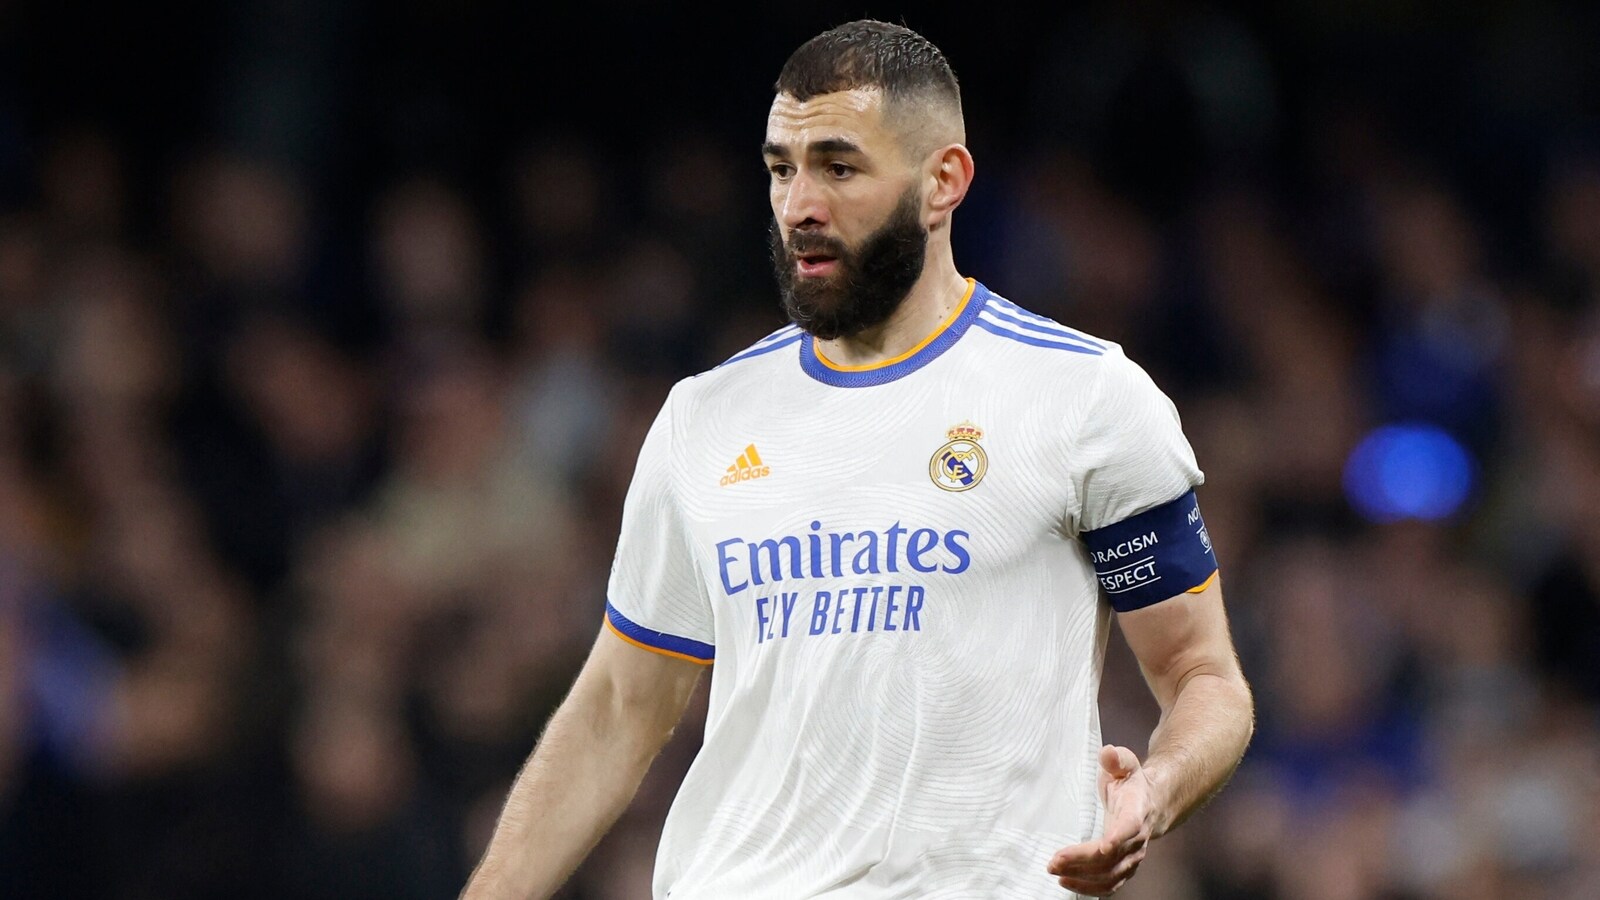 Champions League: Benzema hat-trick gives Real Madrid 3-1 win vs Chelsea